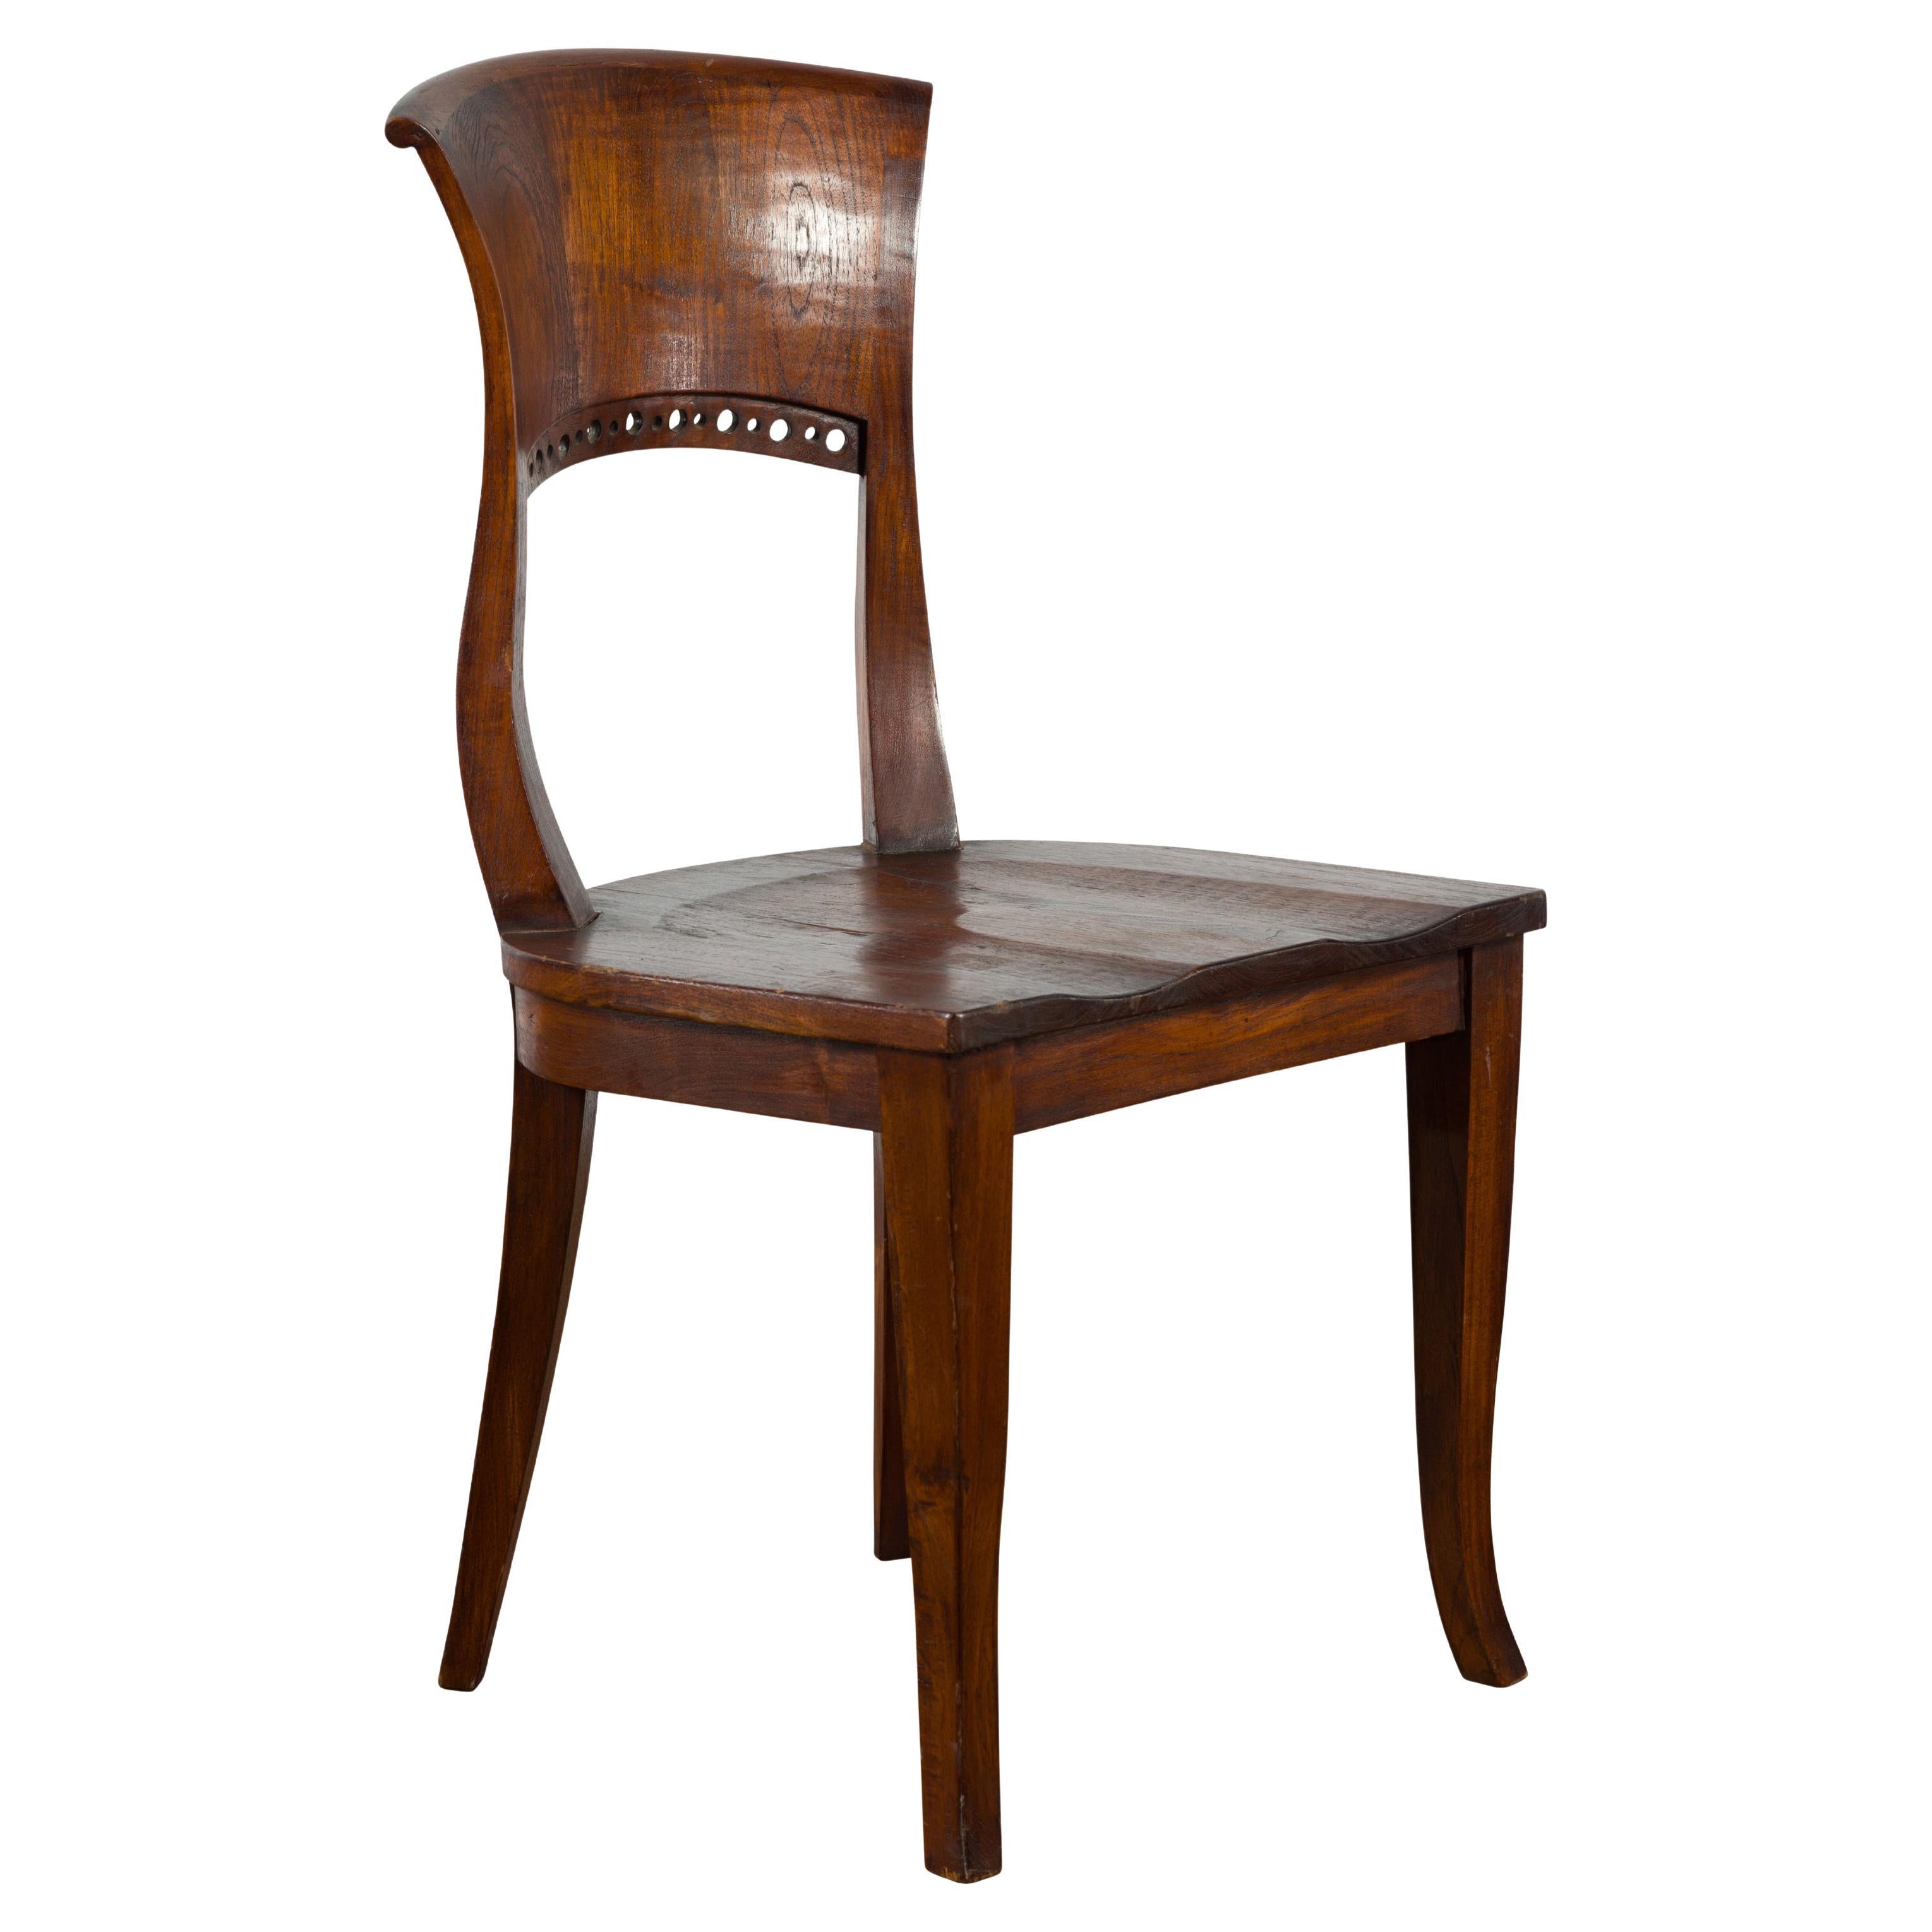 Vintage Indonesia Wooden Accent Chair with Pierced Circular Motifs Curving Back